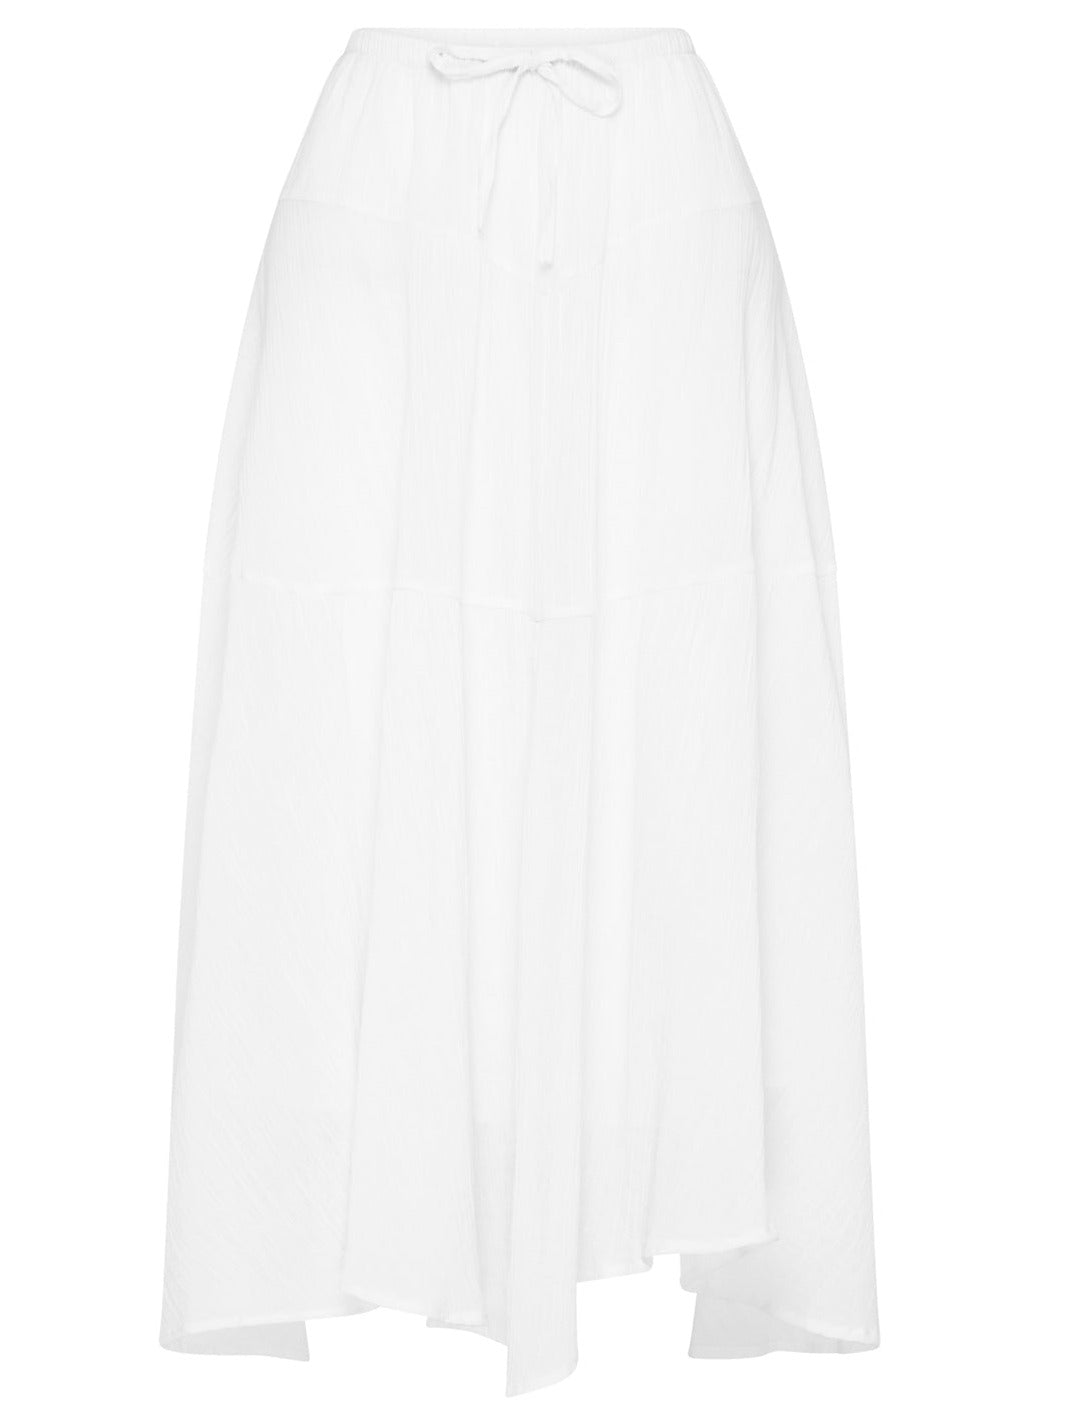 Womens boho white cotton maxi skirt ghost mannequin image front